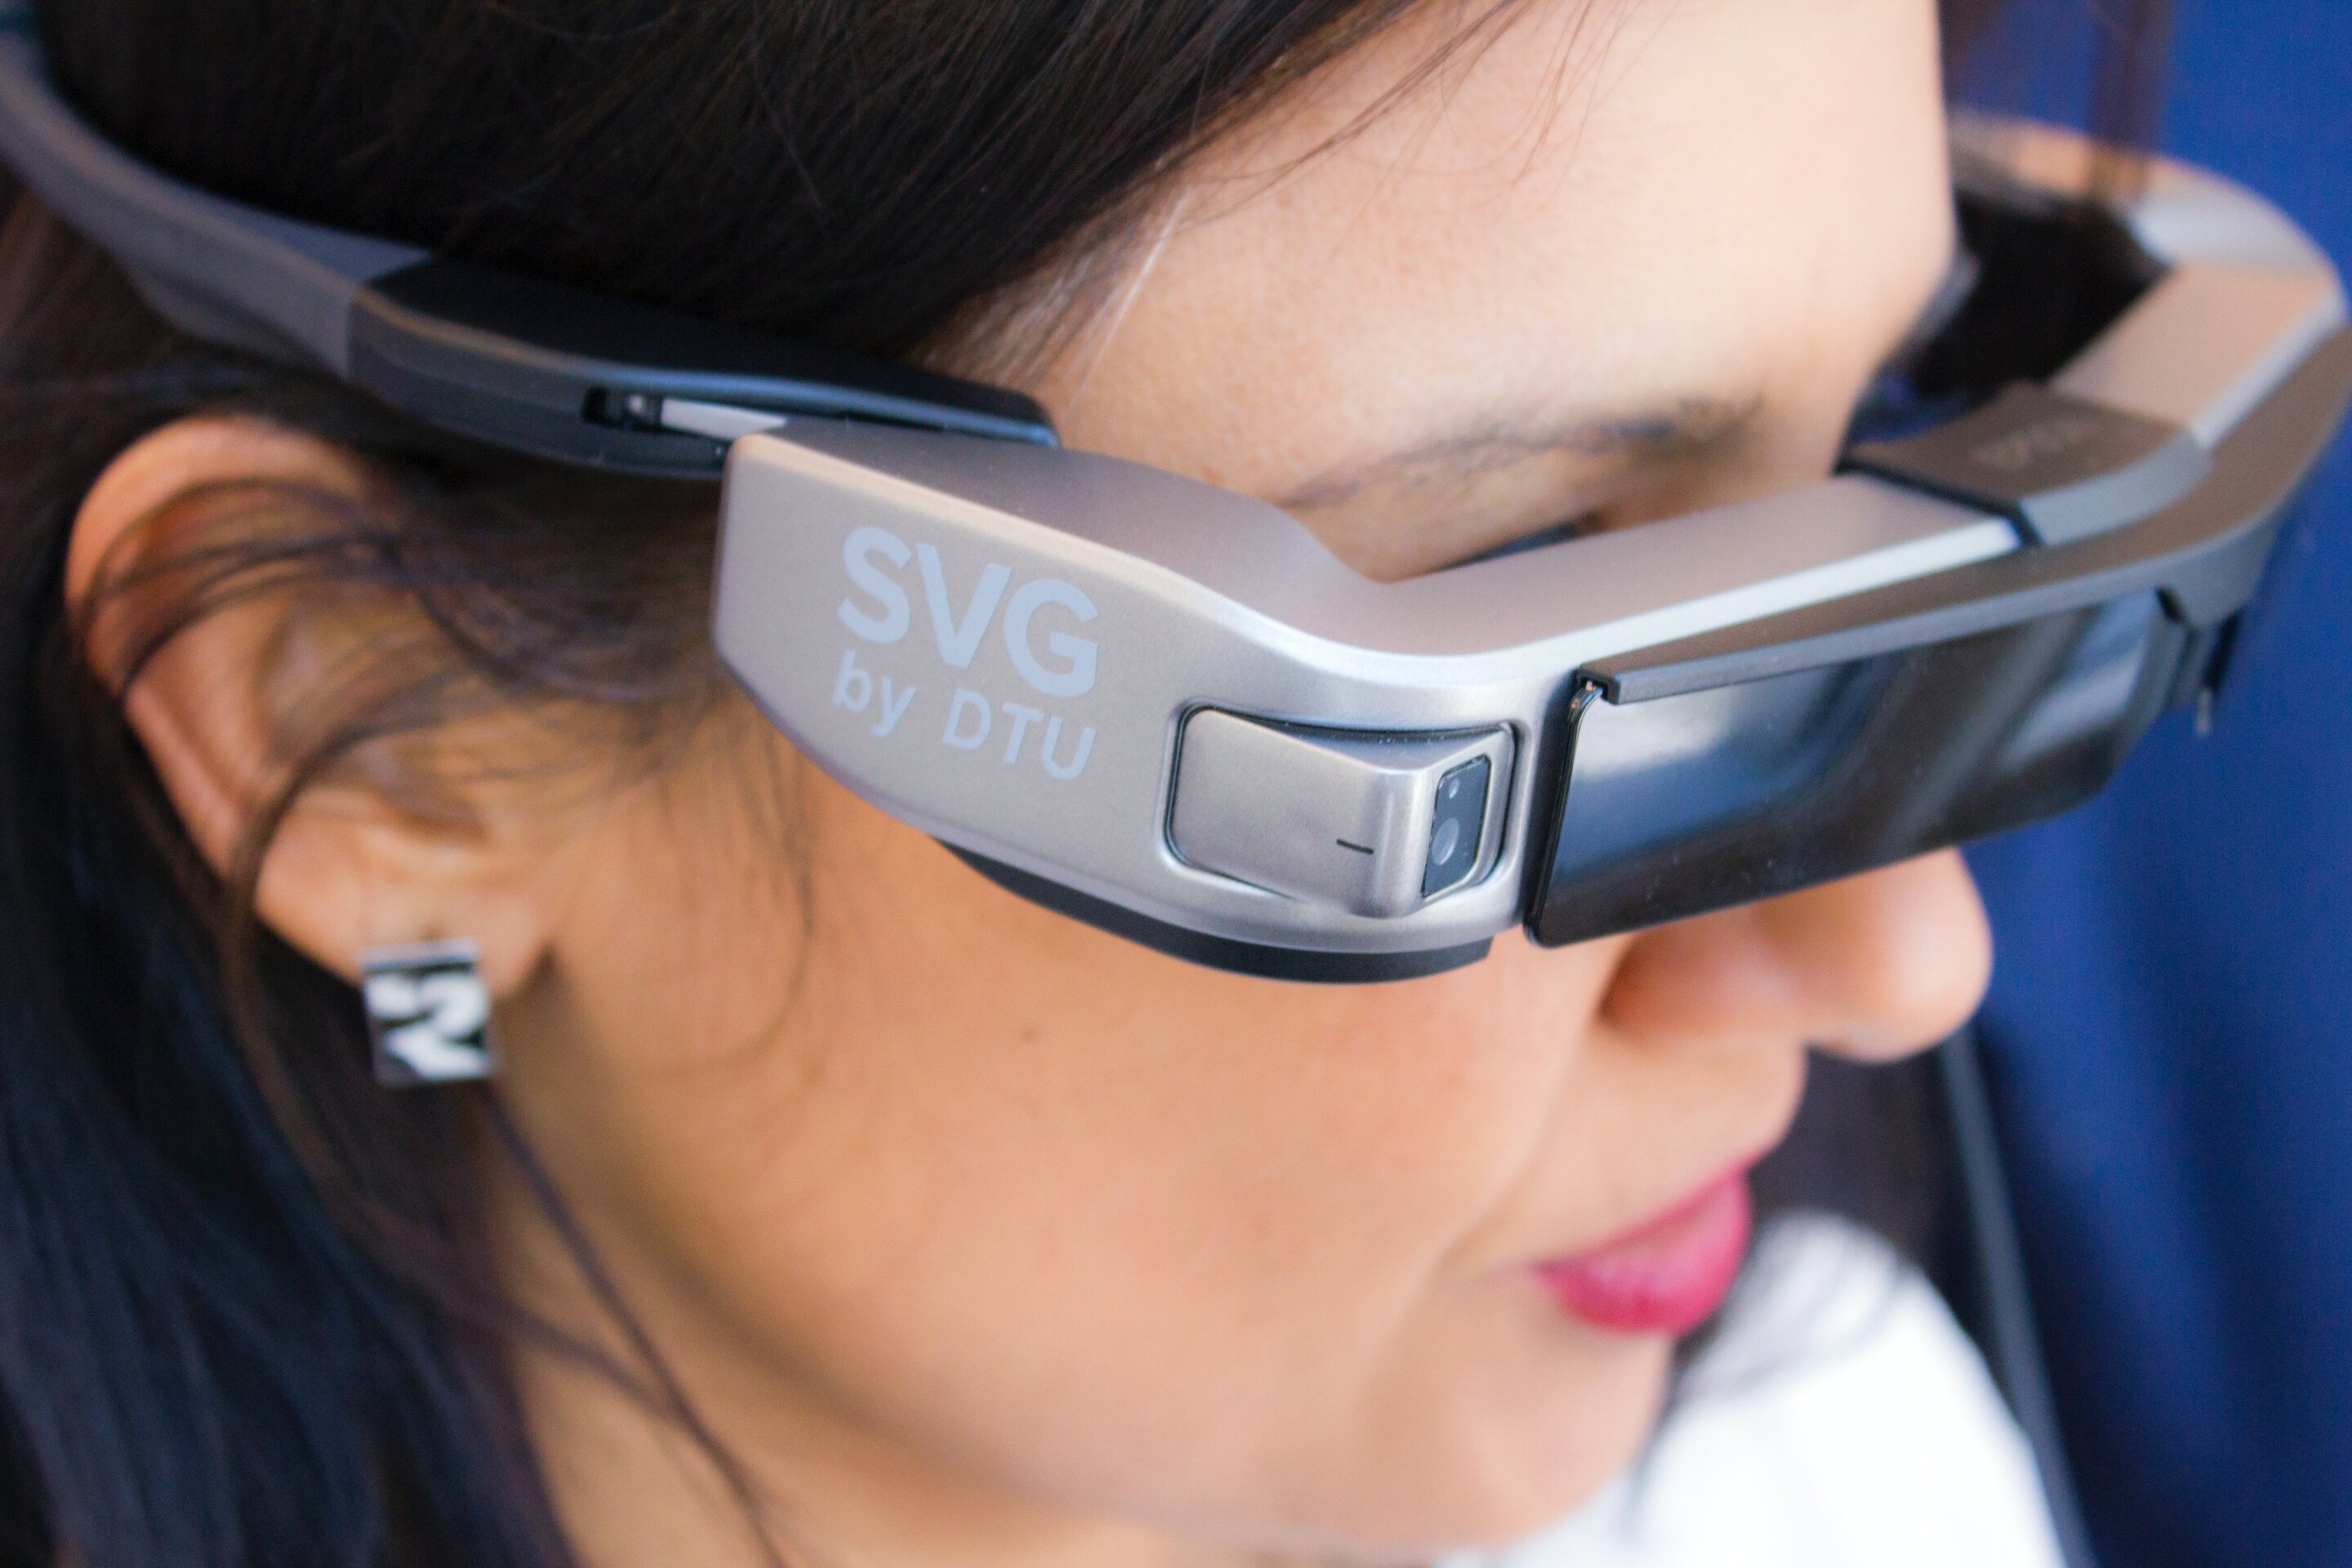 ‘Smart’ glasses skew power balance with non-wearers, say researchers